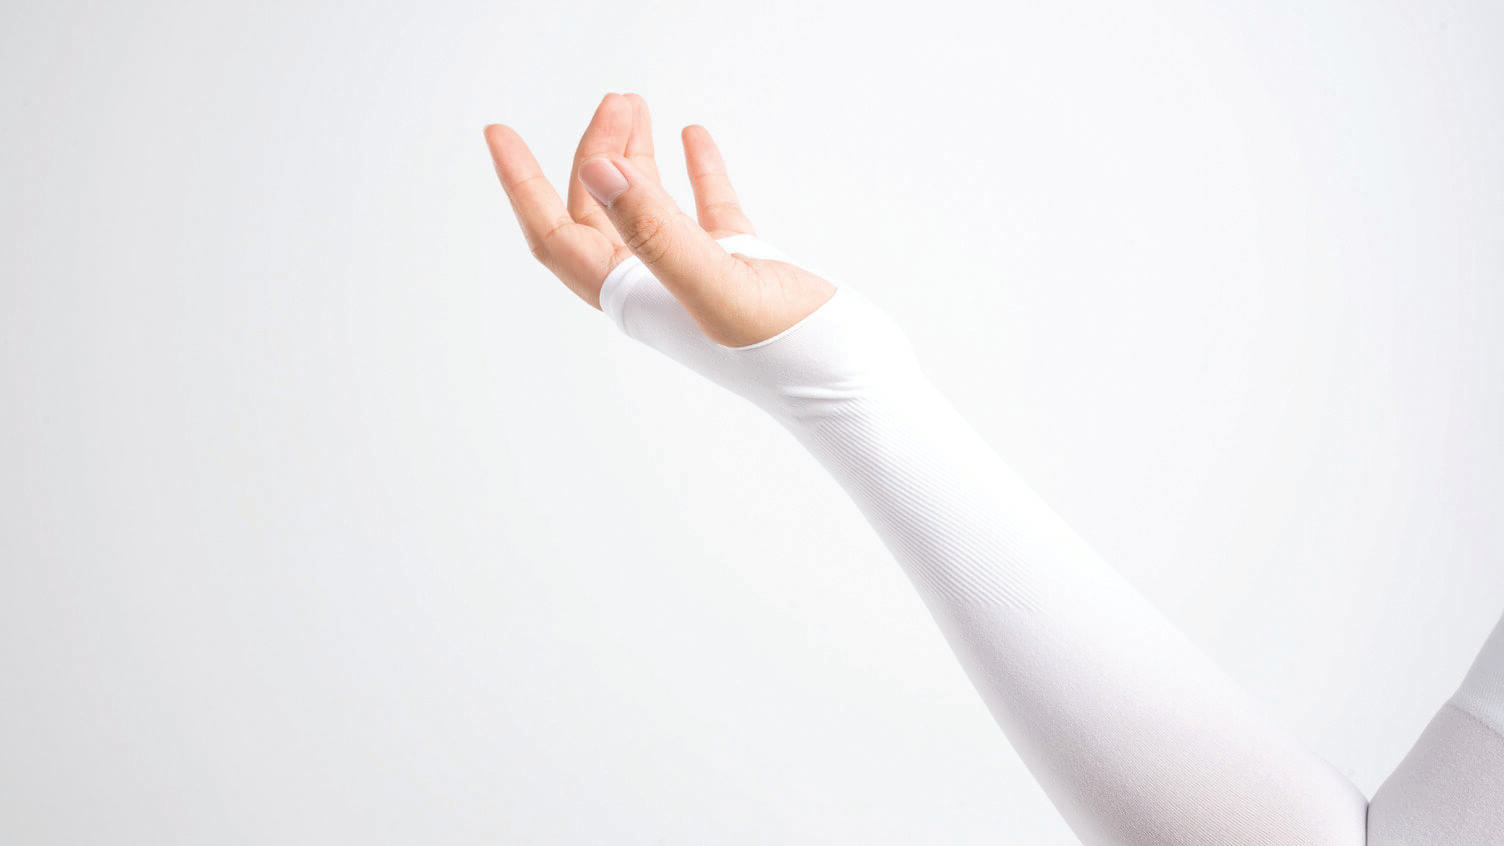 Hand with elastic wrist and arm support for relieve injury